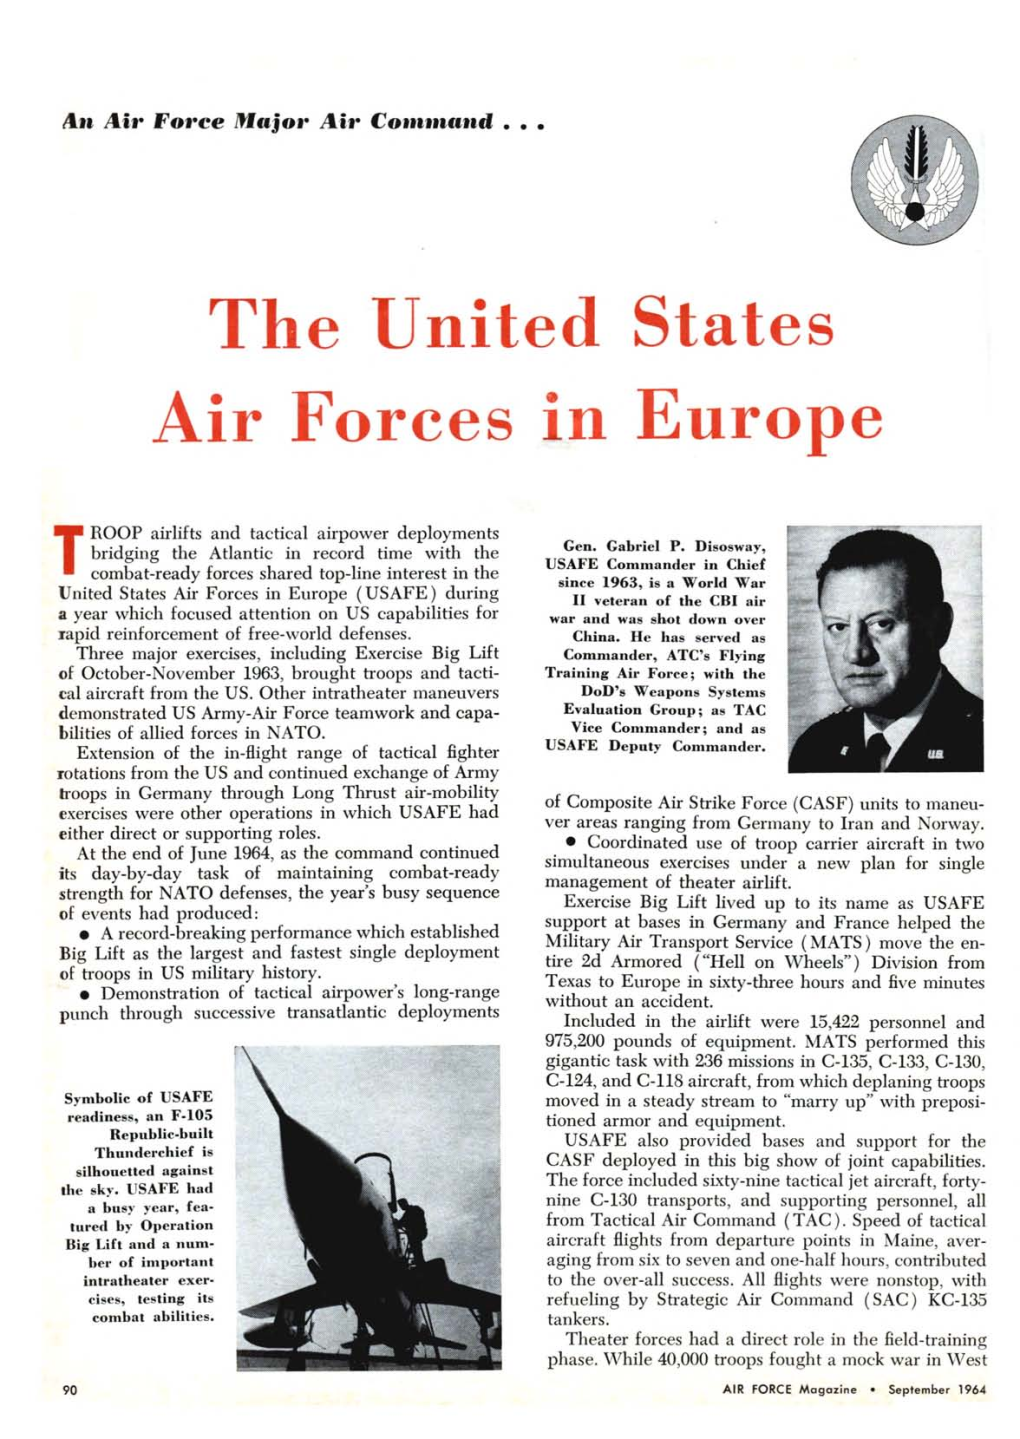 The United States Air Forces in Europe